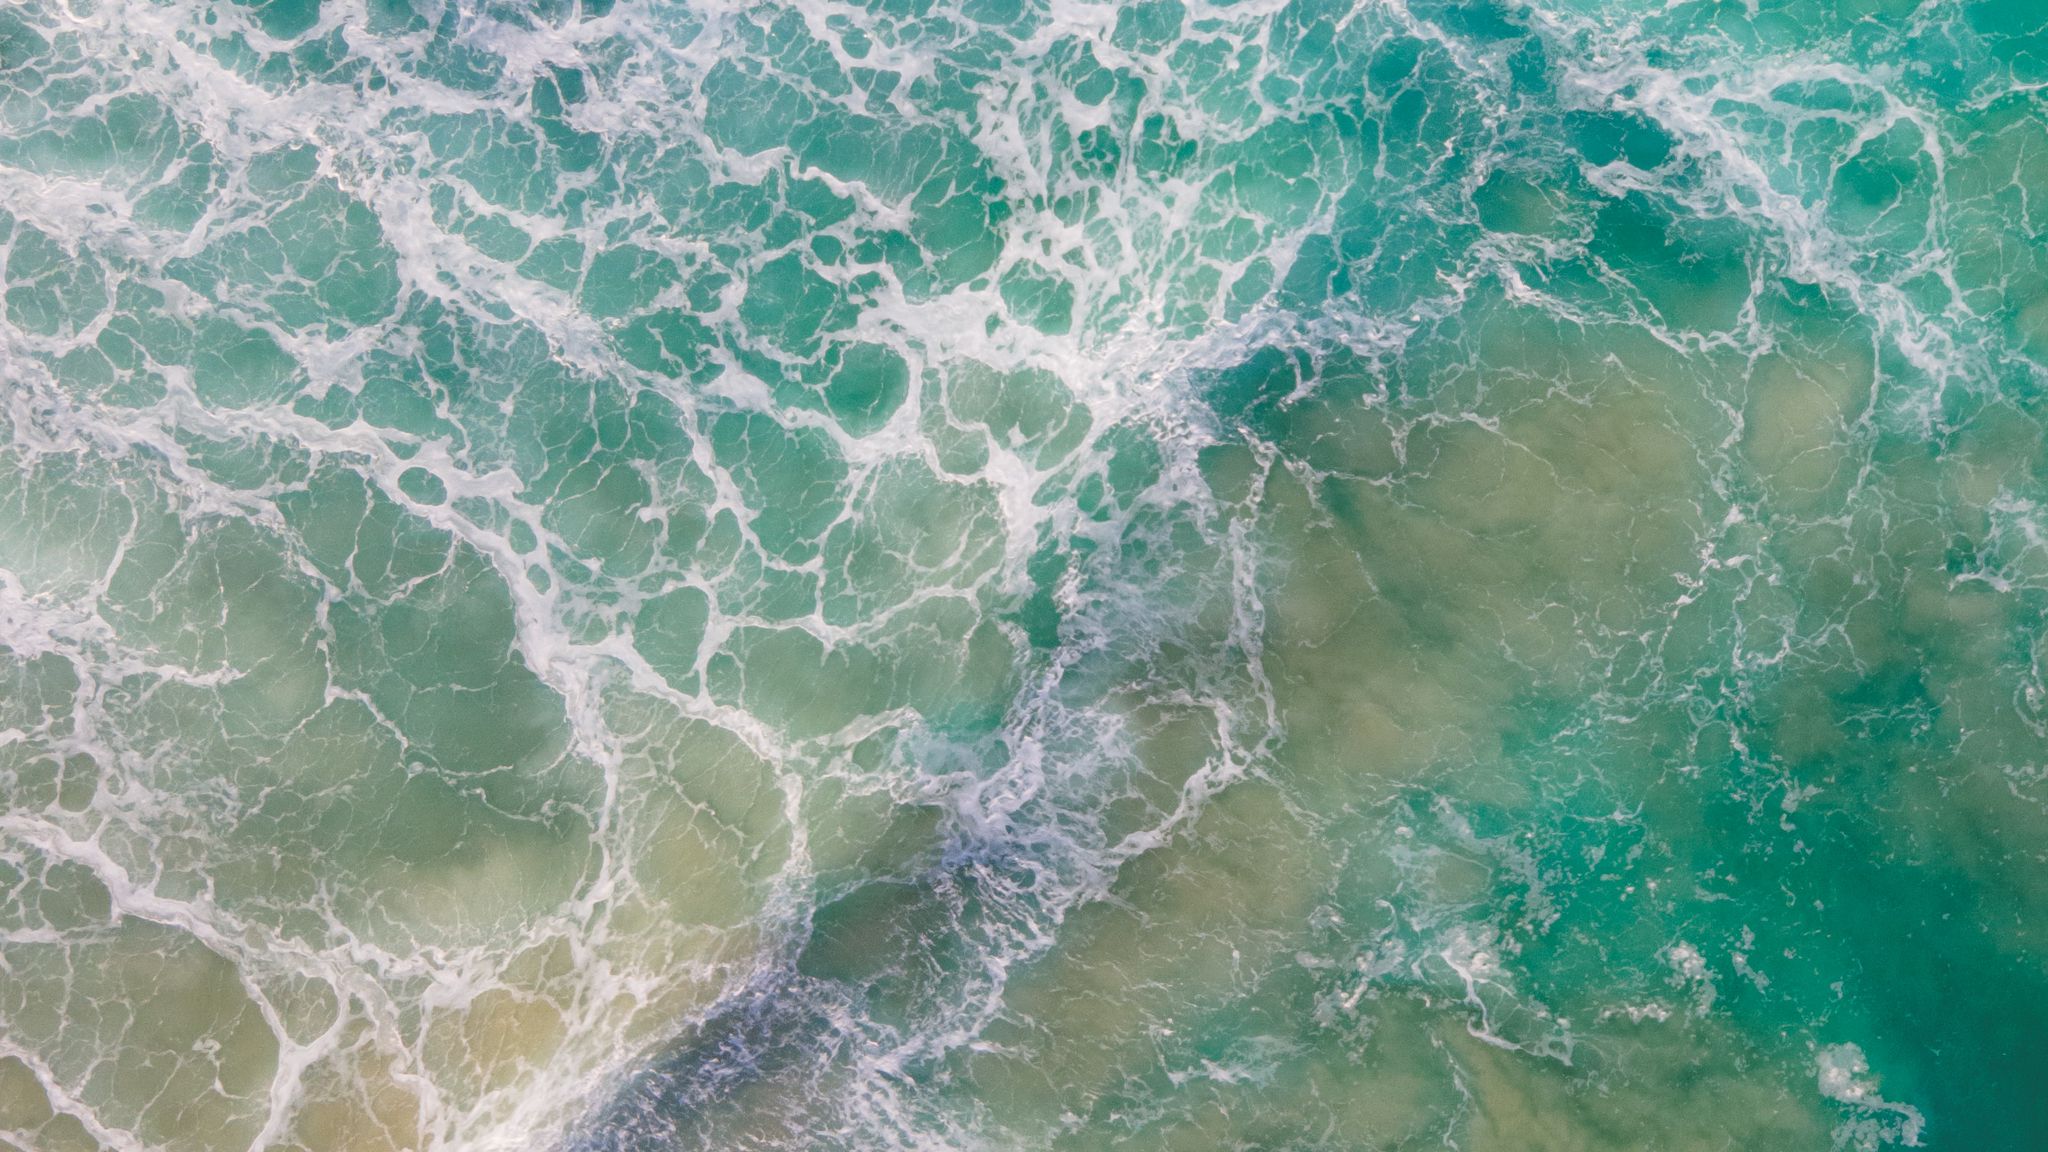 Download Wallpaper 2048x1152 Ocean Waves Aerial View Water Ultrawide Monitor Hd Background 7971